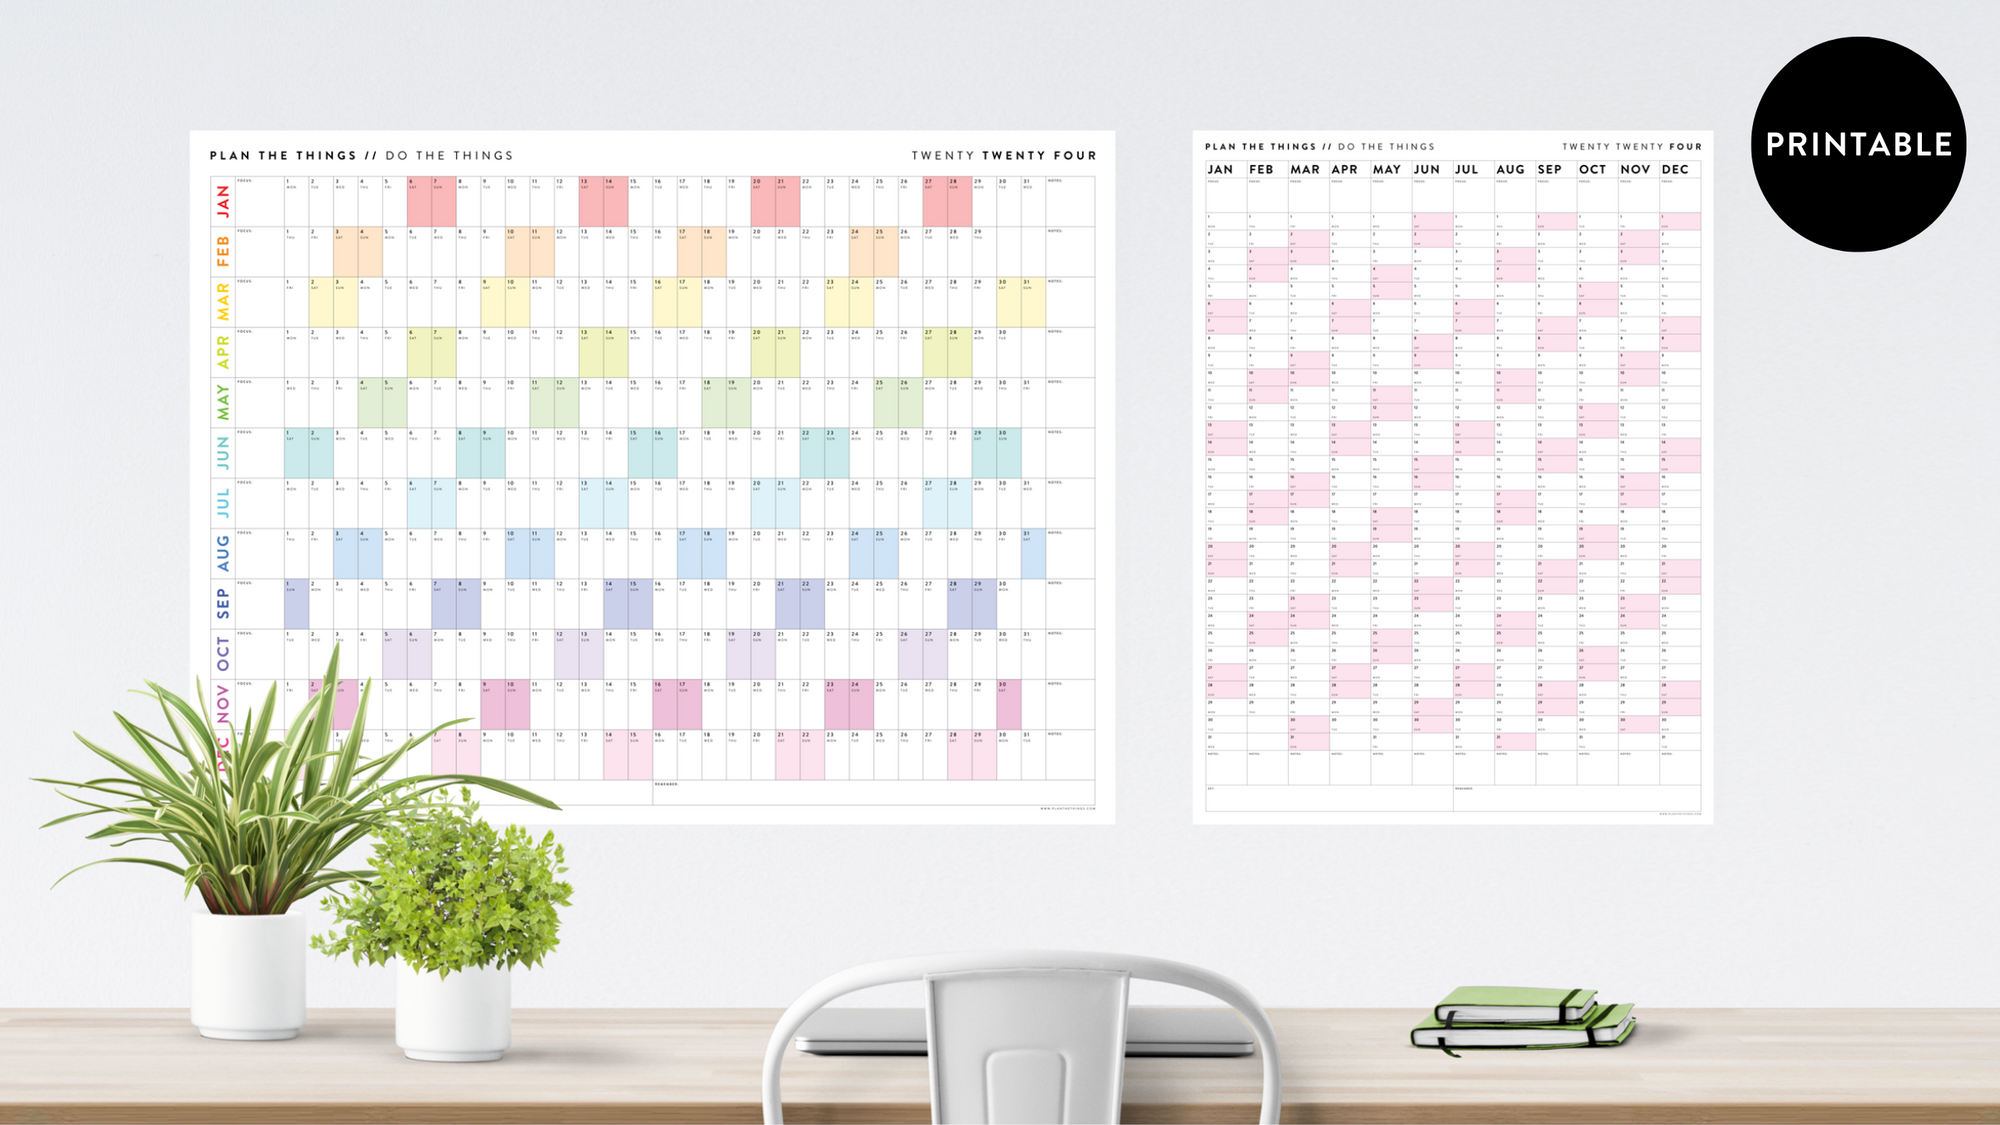 PRINTABLE WALL CALENDARS // INSTANT DOWNLOAD